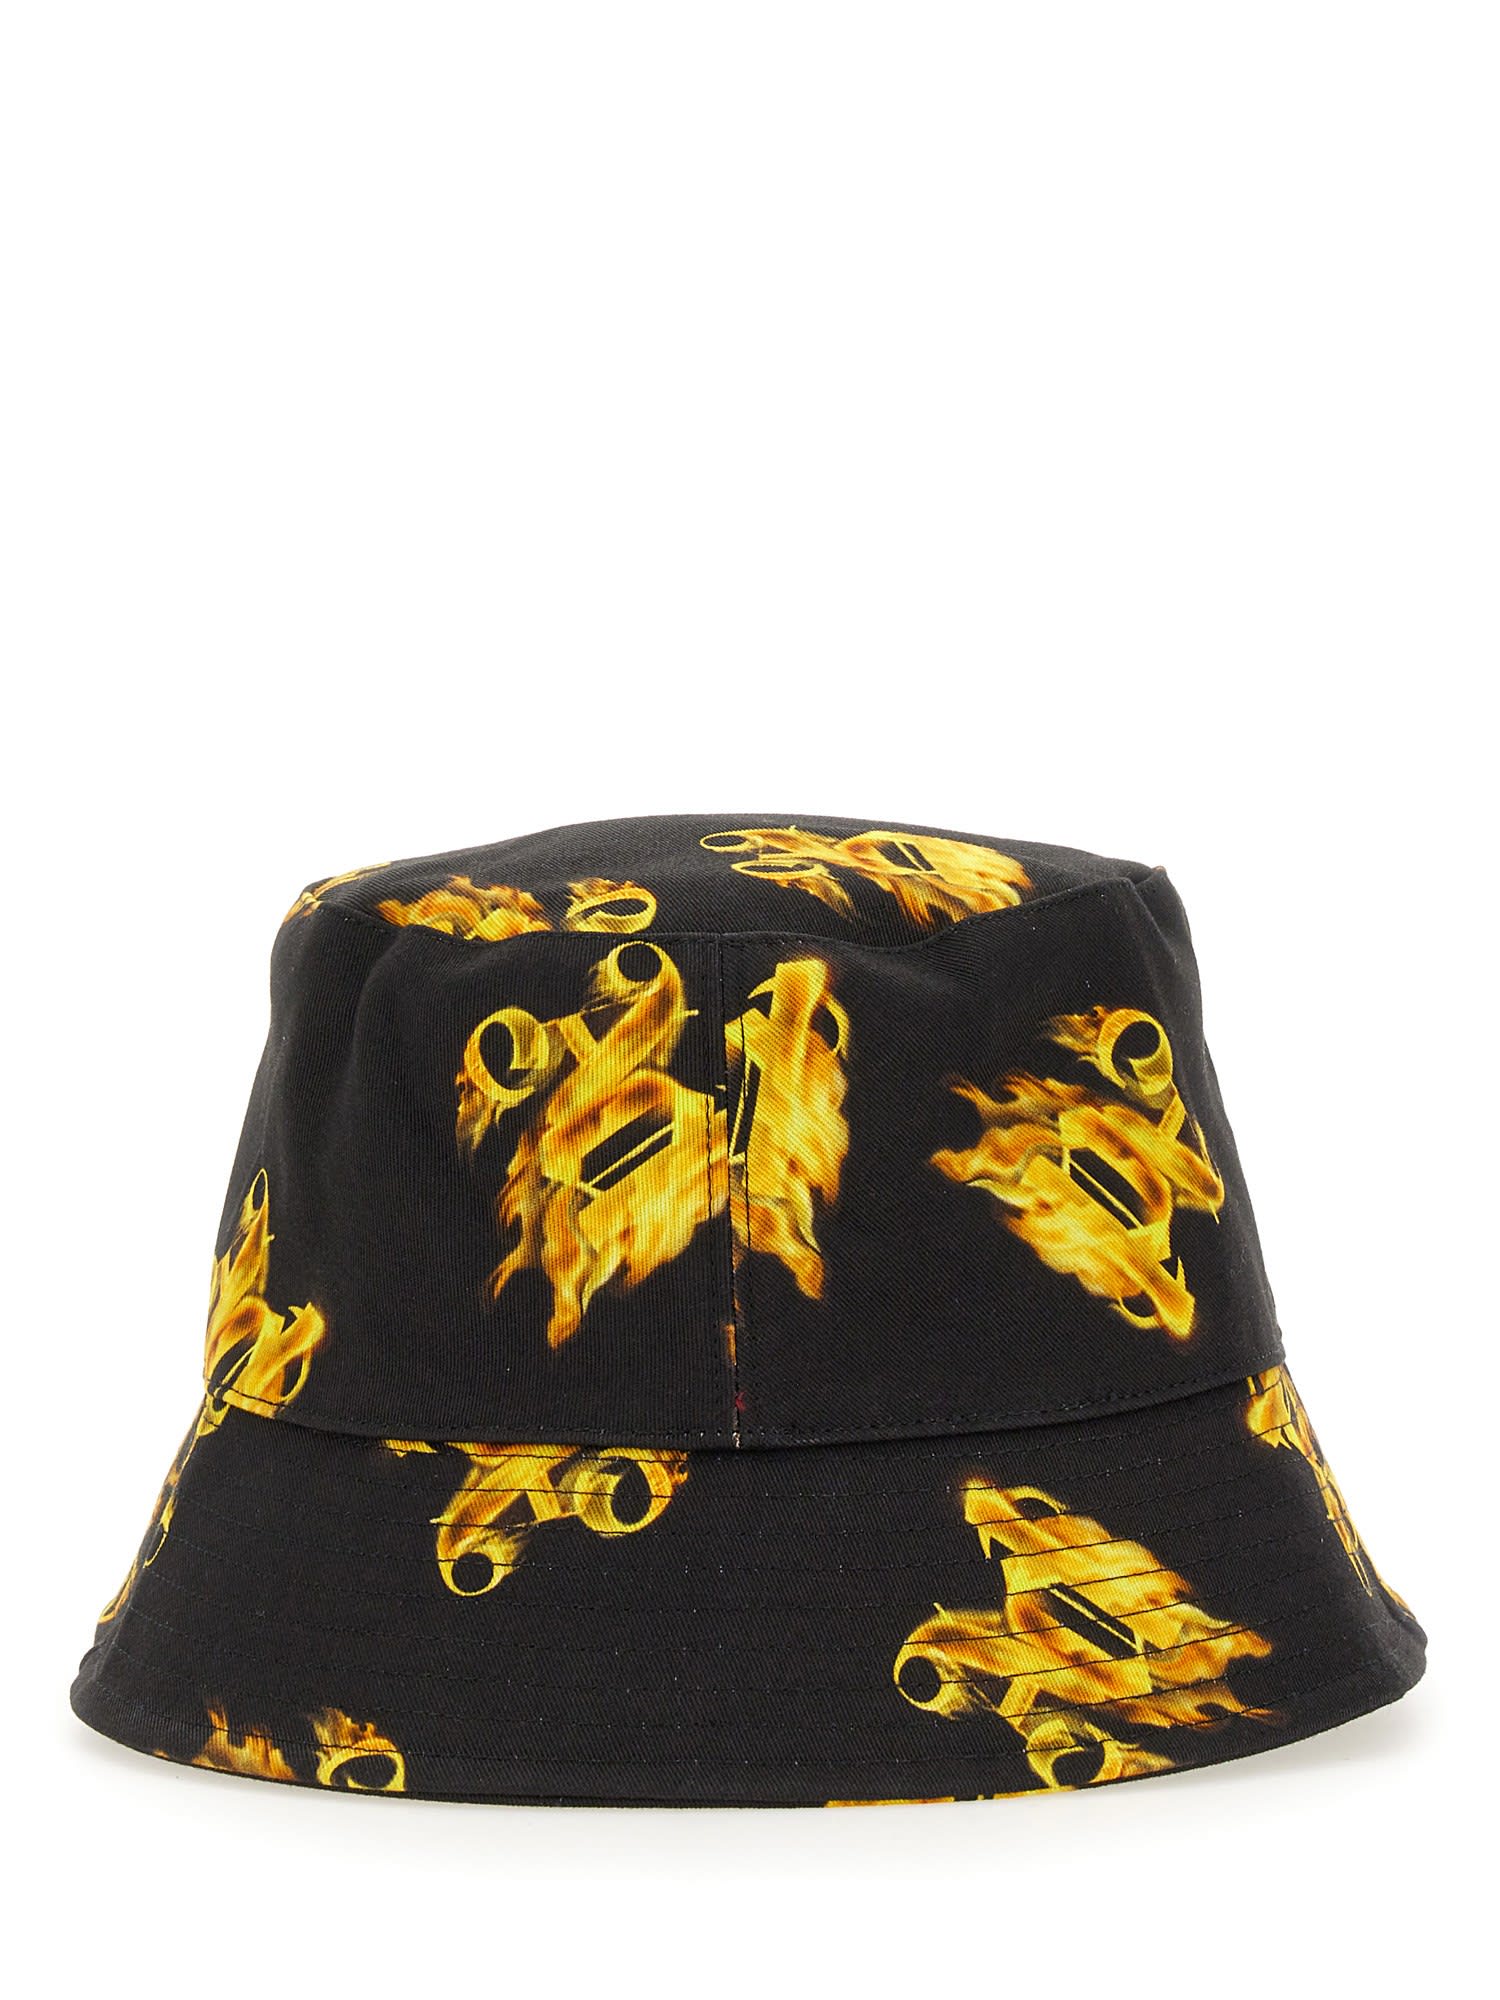 PALM ANGELS BUCKET HAT WITH ALL BURNING MONOGRAM PRINT